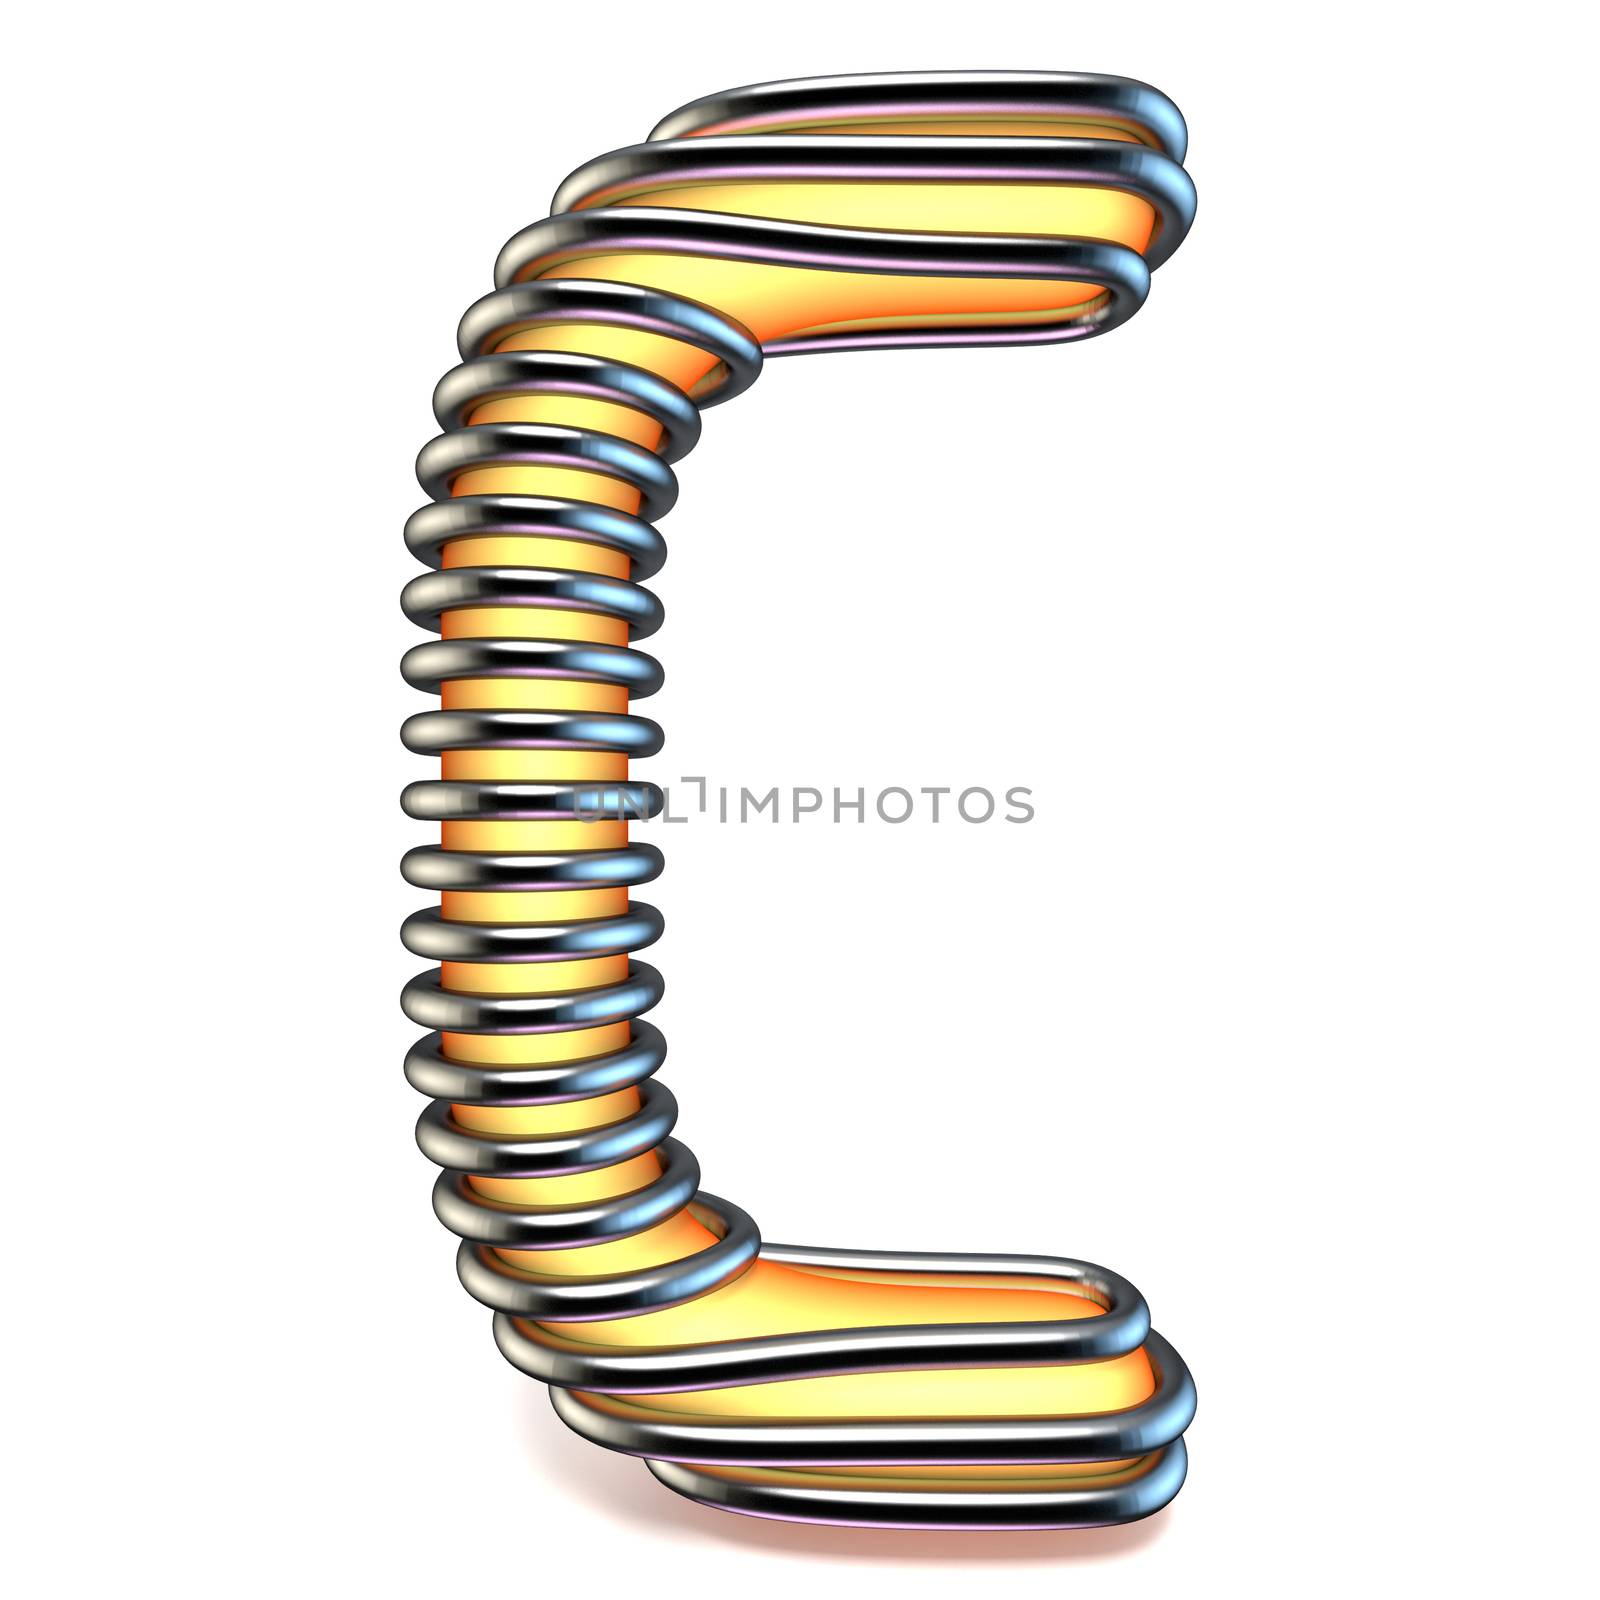 Orange yellow letter C in metal cage 3D render illustration isolated on white background